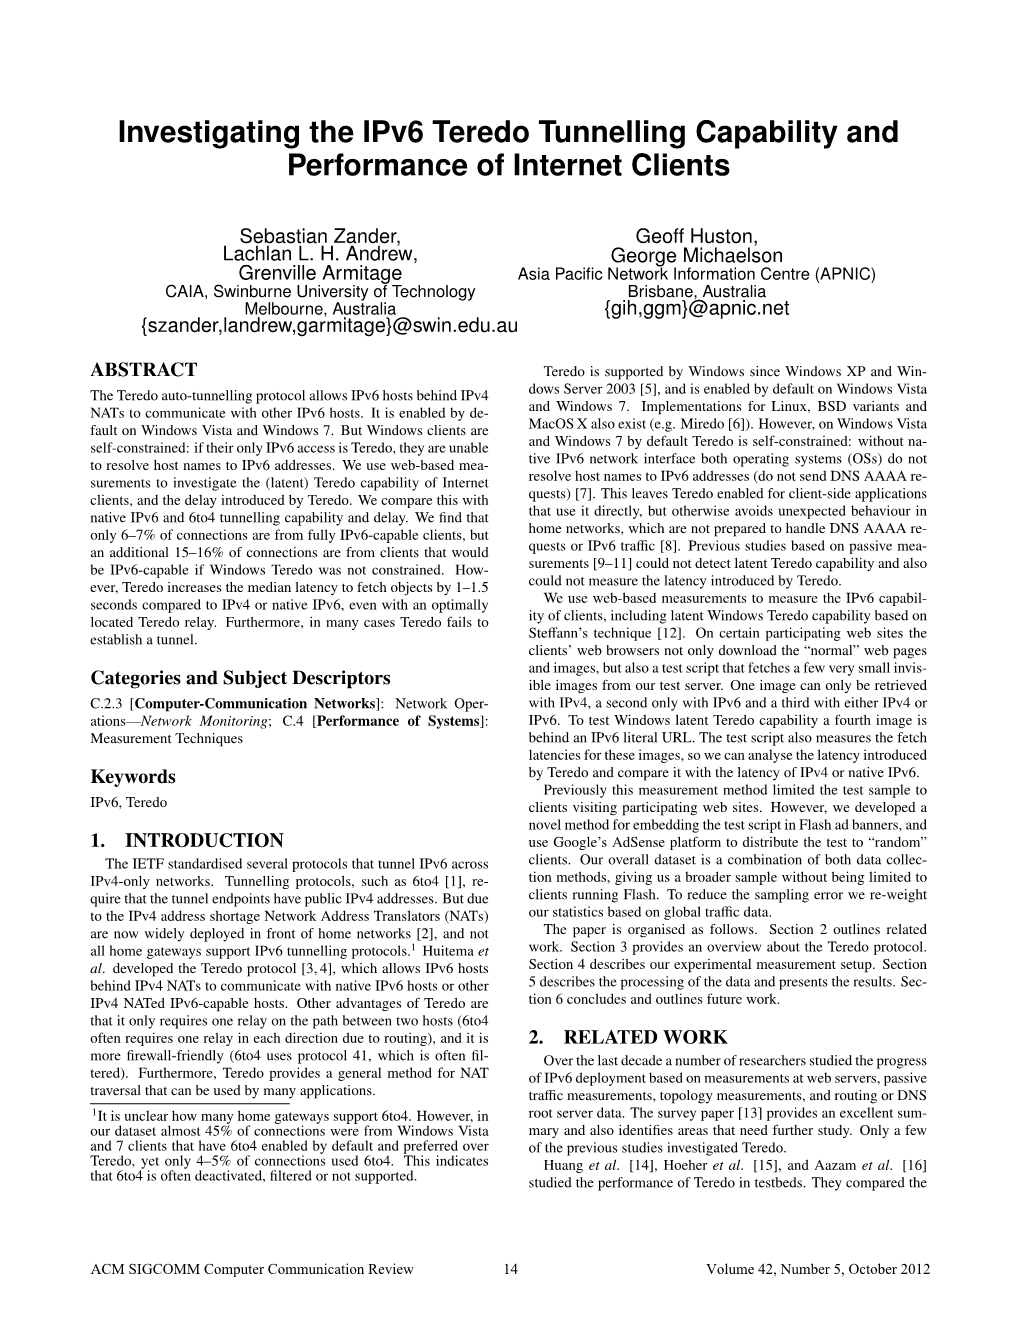 Investigating the Ipv6 Teredo Tunnelling Capability and Performance of Internet Clients